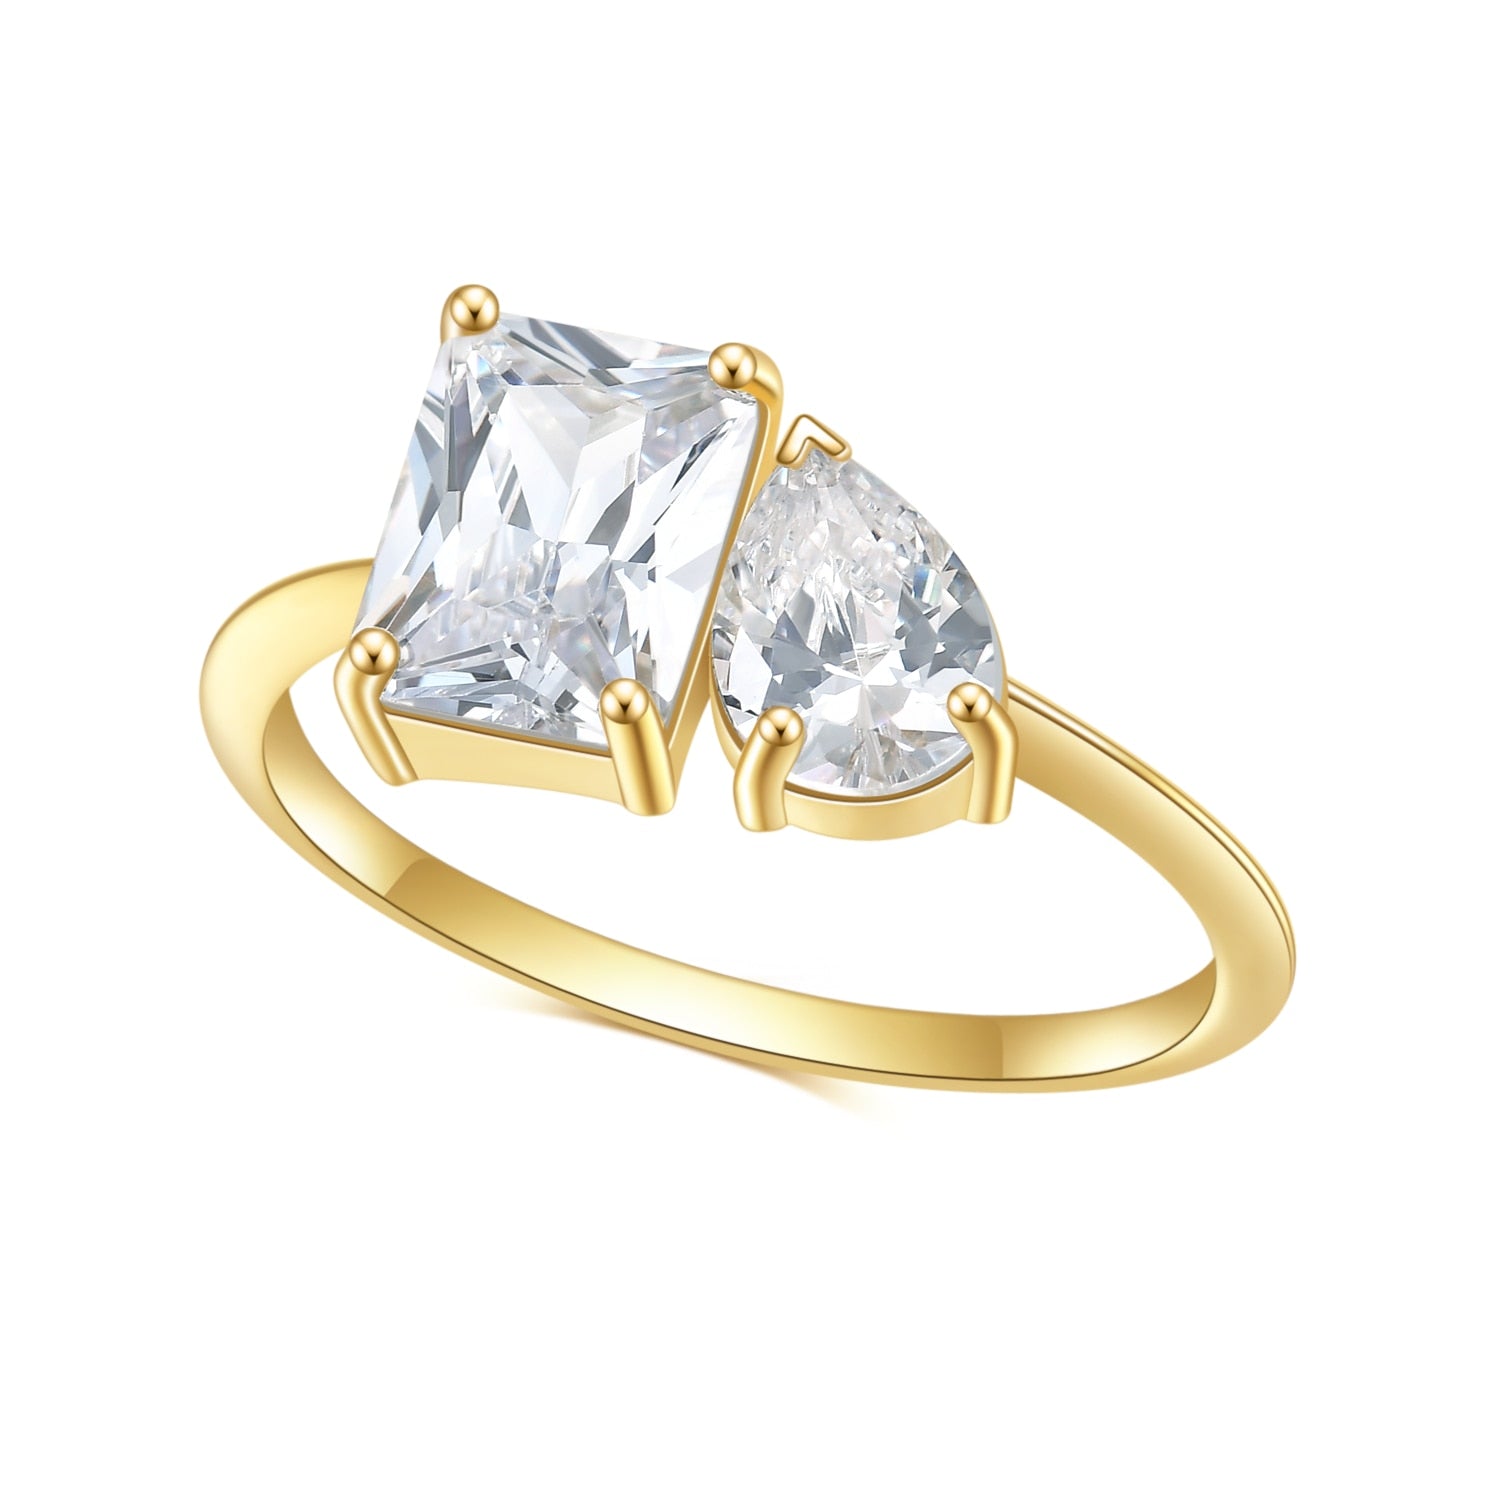 A gold Toi et Moi ring with a emerald cut moissanite and a tear drop moissanite.